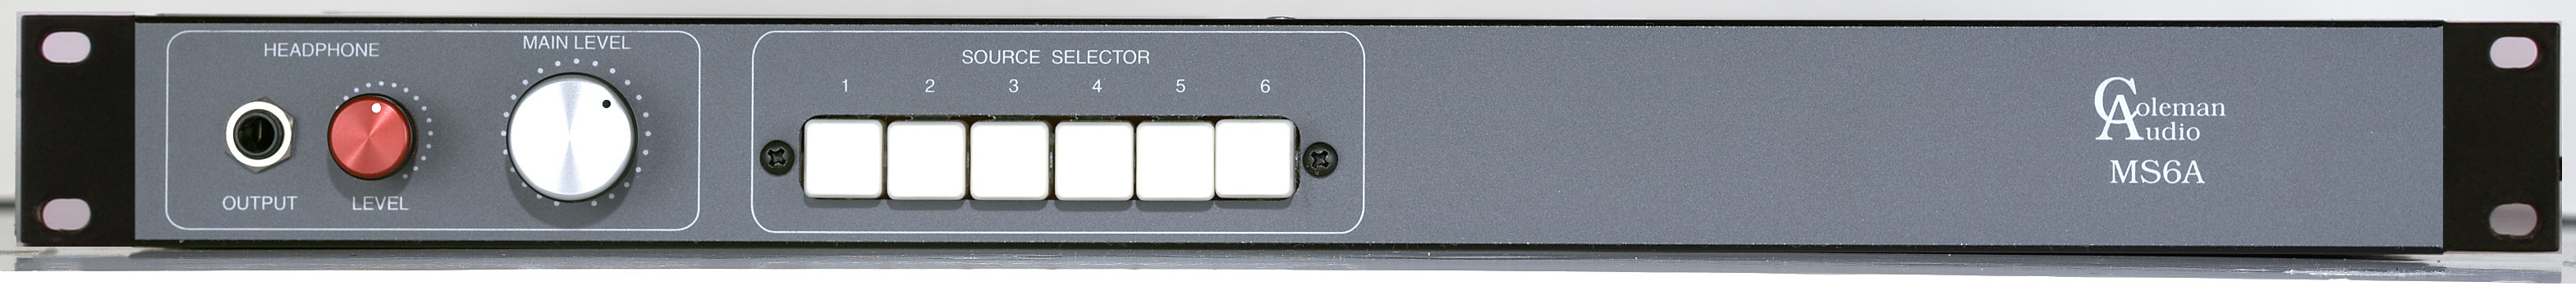 Coleman Ms6a - Monitor Controller - Variation 1